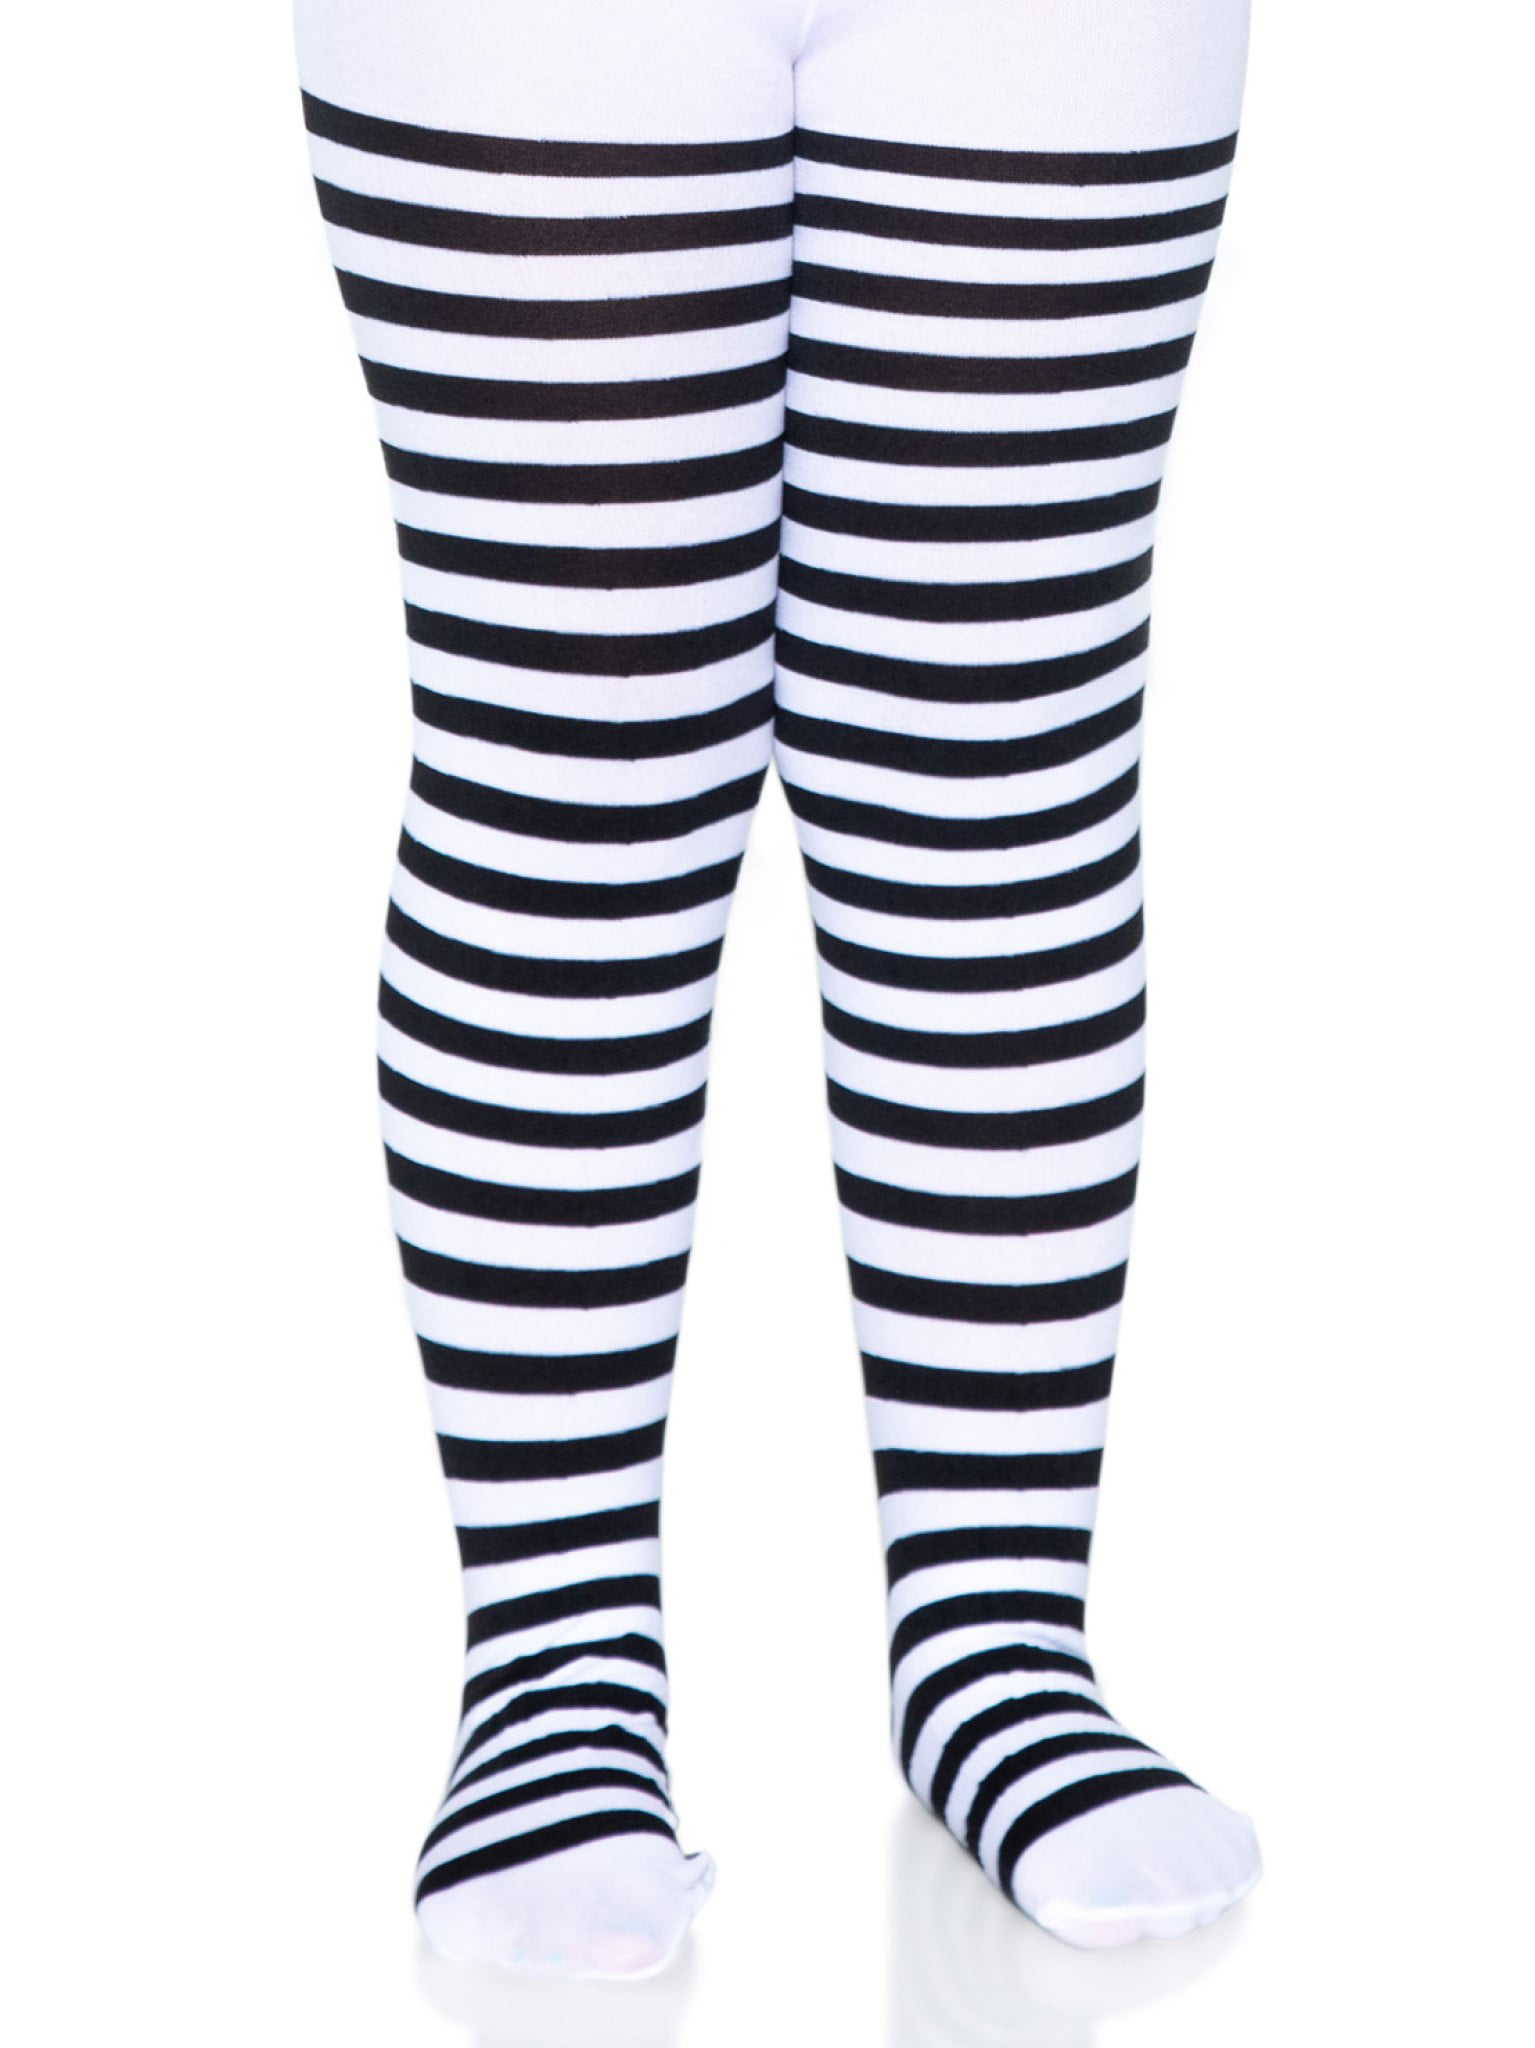  Black and White Stripe Stretchy Tights - Adult Standard Size, 1  Pair - Perfect for Halloween, Everyday Wear & Performances : Clothing,  Shoes & Jewelry